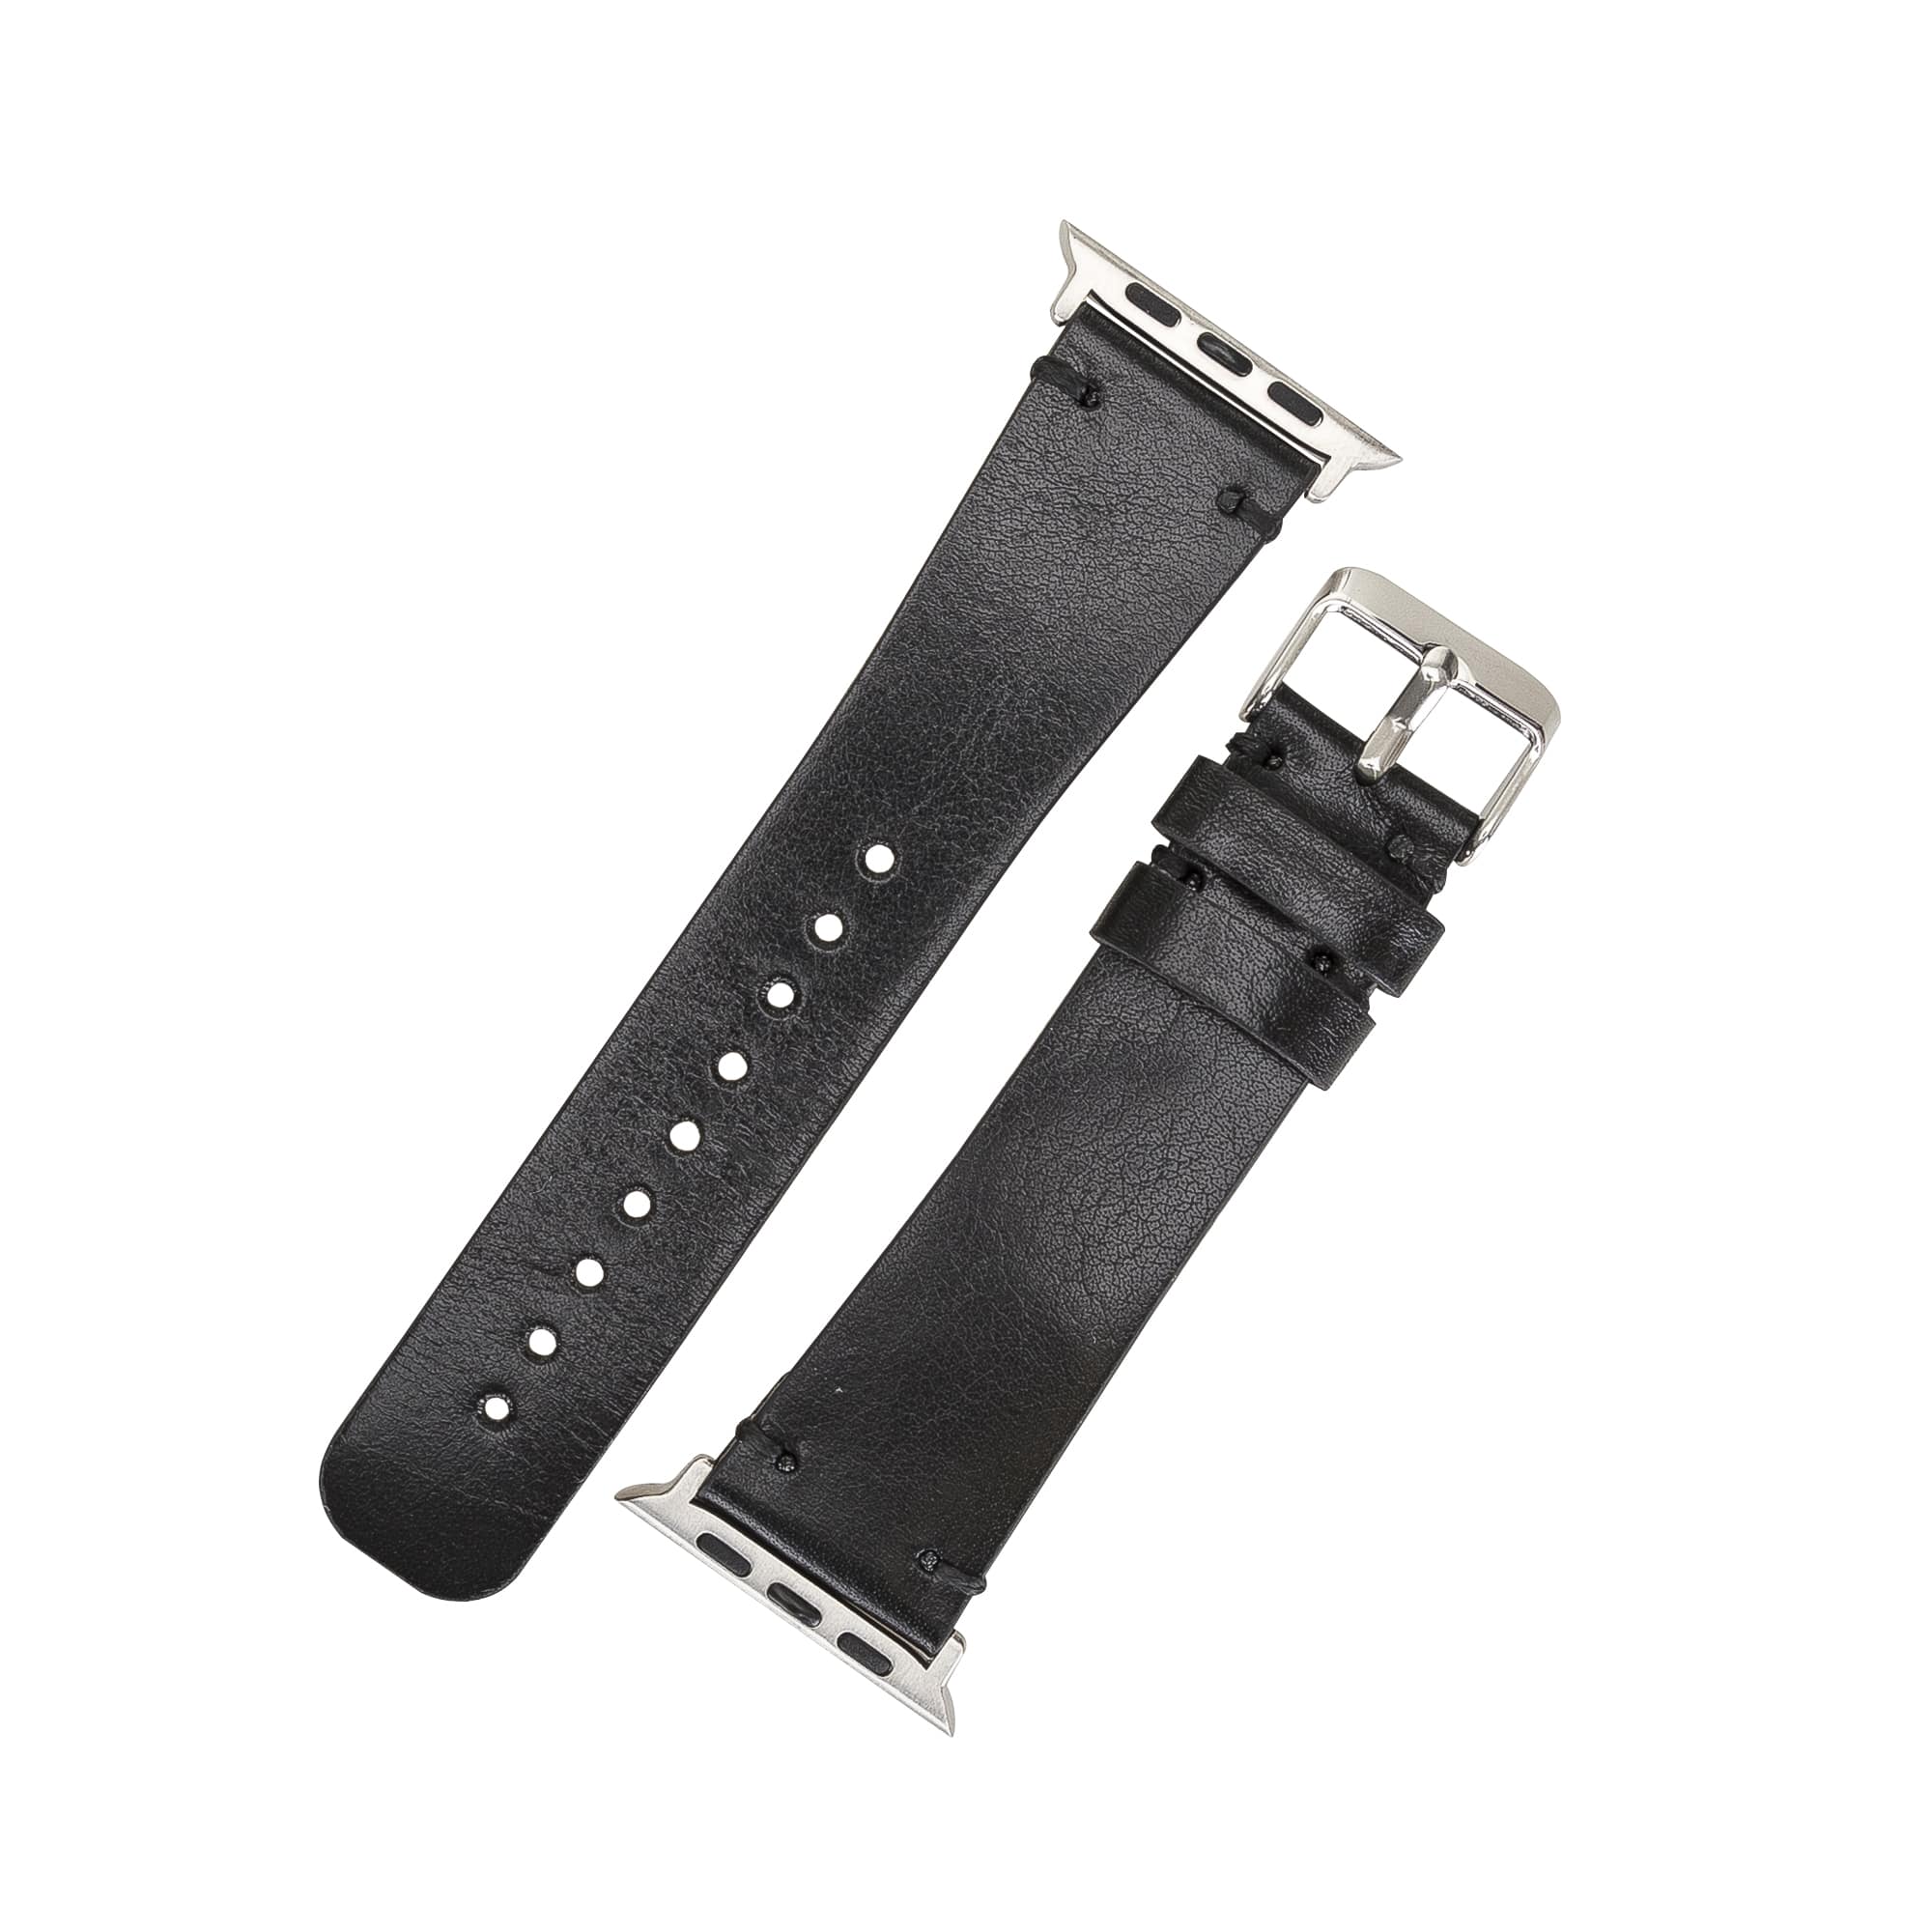 Kennington Black Genuine Leather Apple Watch Band Strap 38mm 40mm 42mm 44mm 45mm for All Series - Bomonti - 4